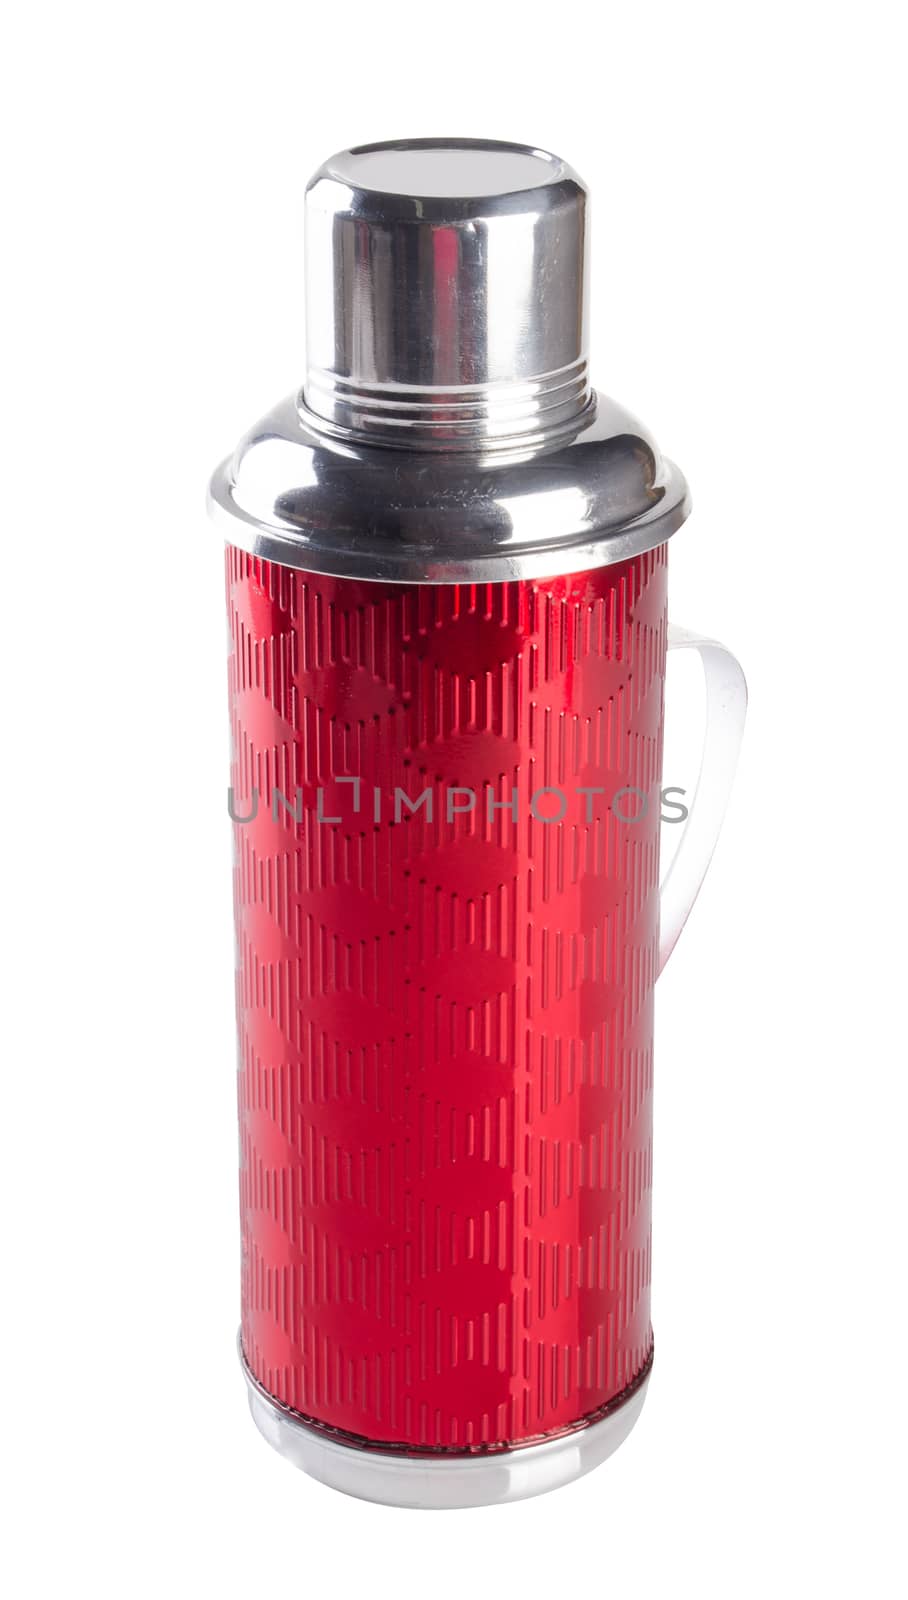 Thermo, Thermo flask on background. by heinteh